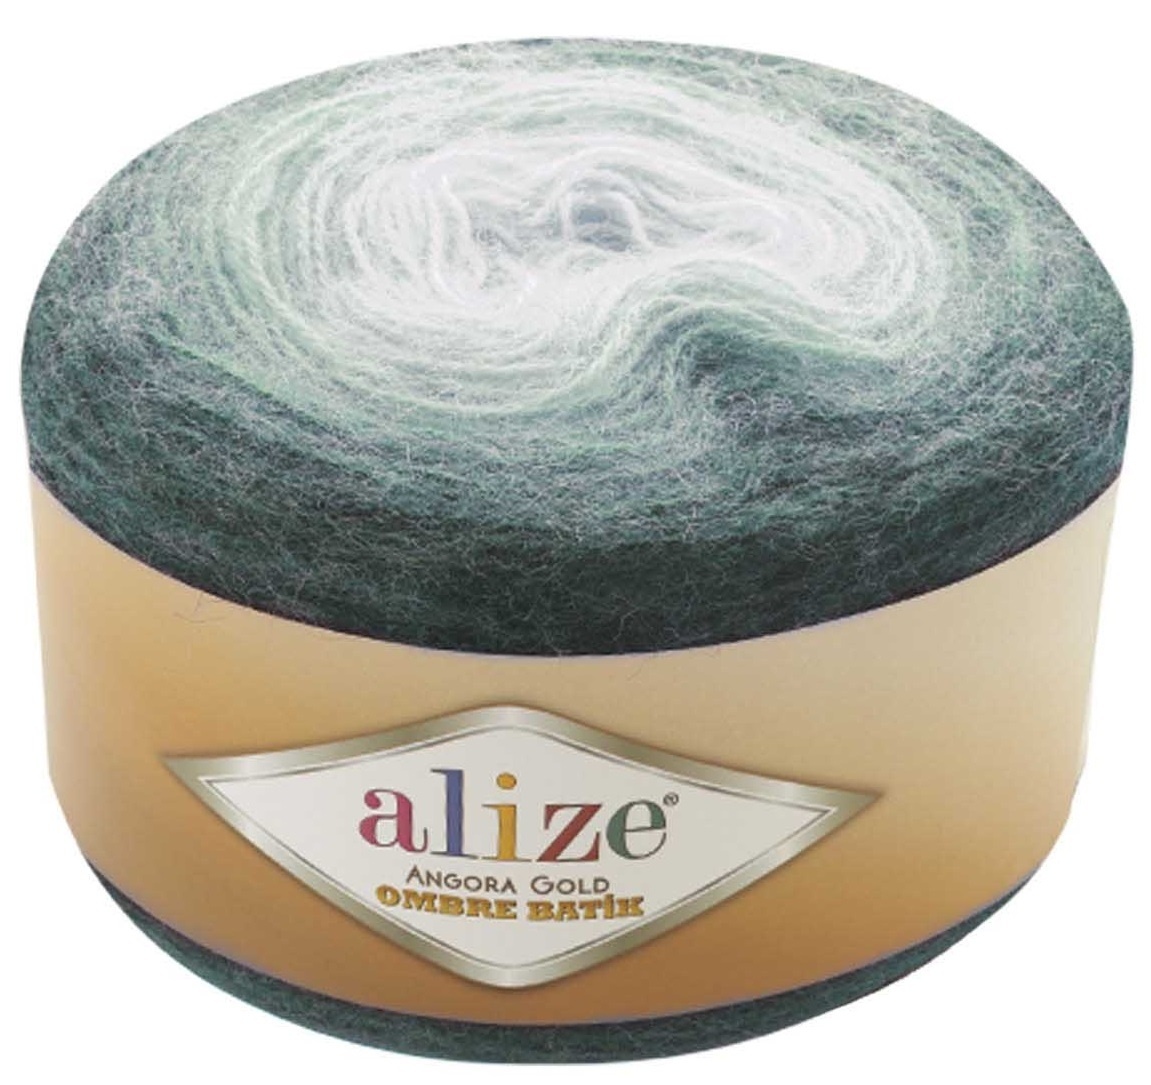 Alize Angora Gold Ombre Batik, 20% Wool, 80% Acrylic 4 Skein Value Pack, 600g фото 2